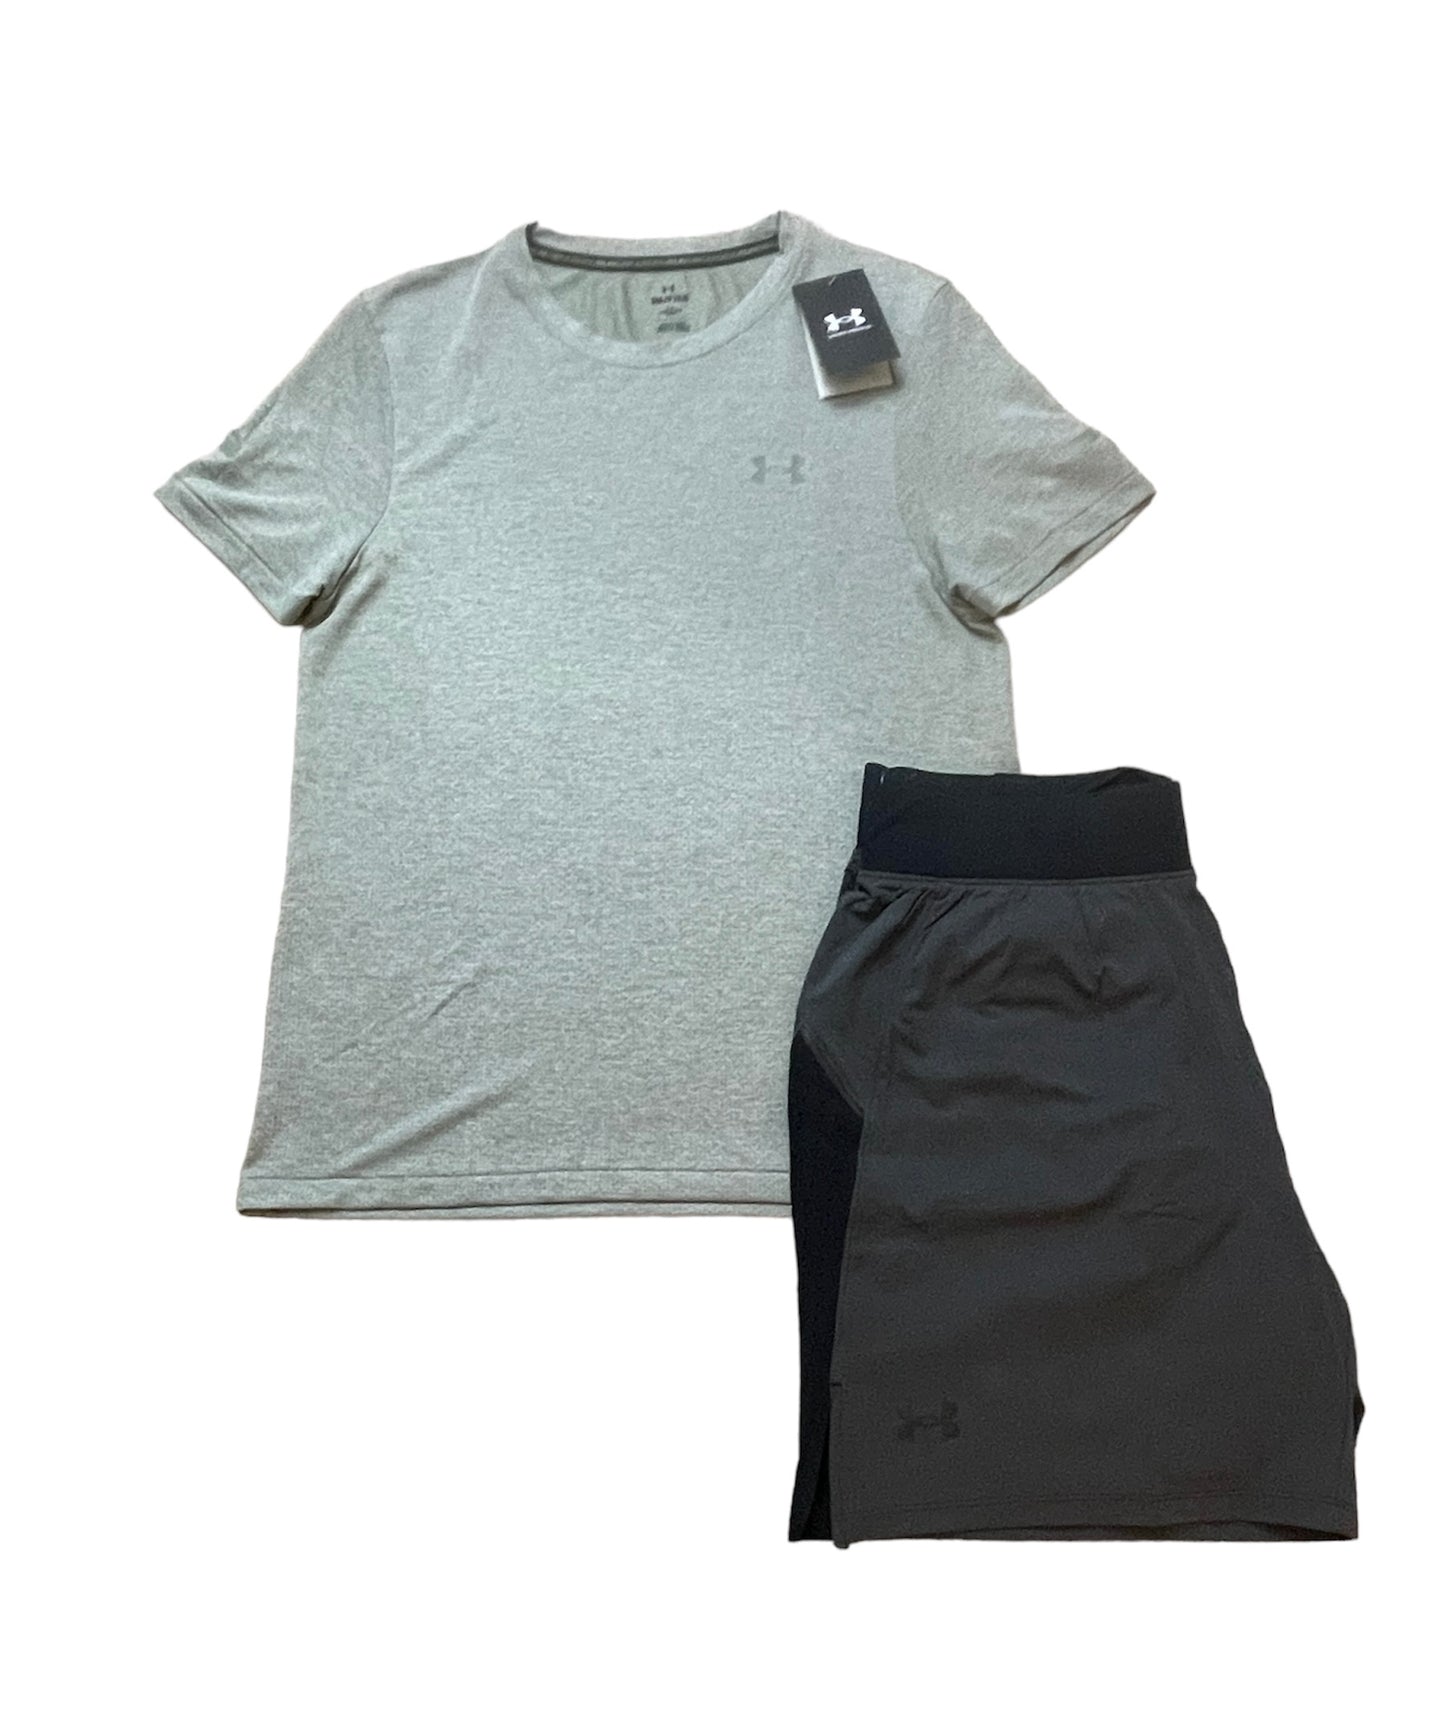 UNDER ARMOUR SEAMLESS STRIDE T-SHIRT & LAUNCH PRO SHORTS - GREY / BLACK